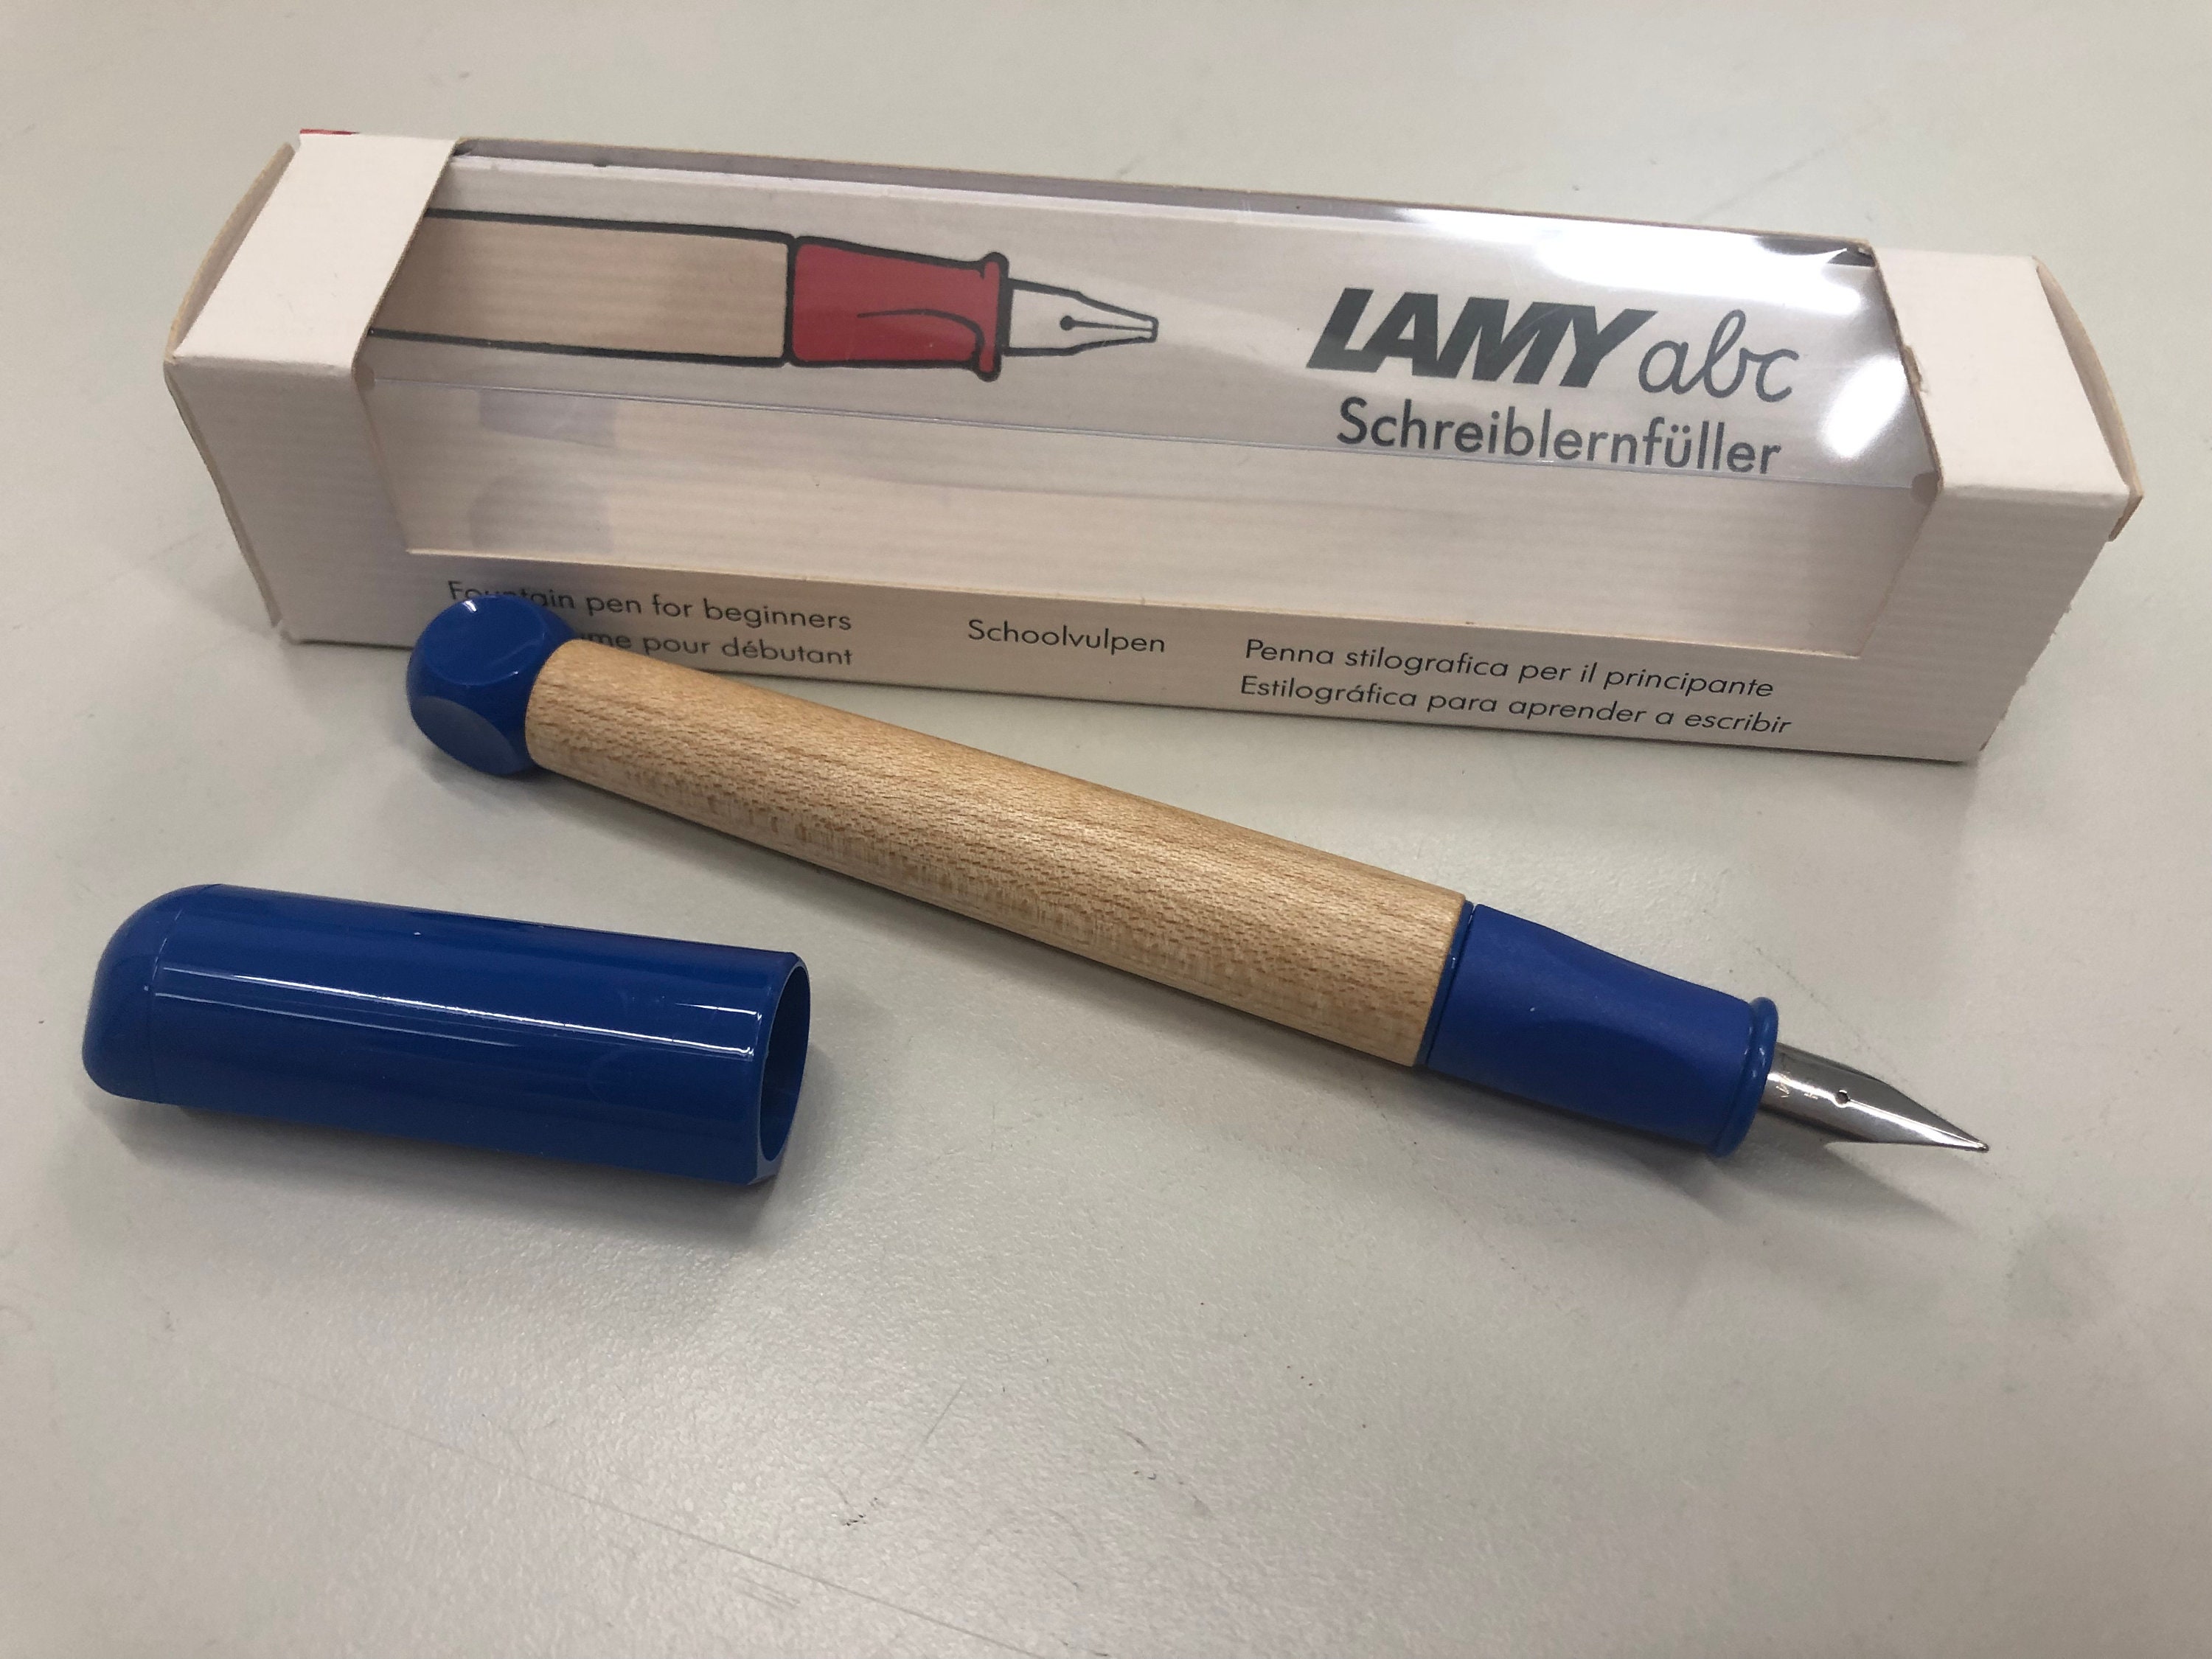 LAMY Abc Learning to Write Fountain Pen Fountain Pen With Desired